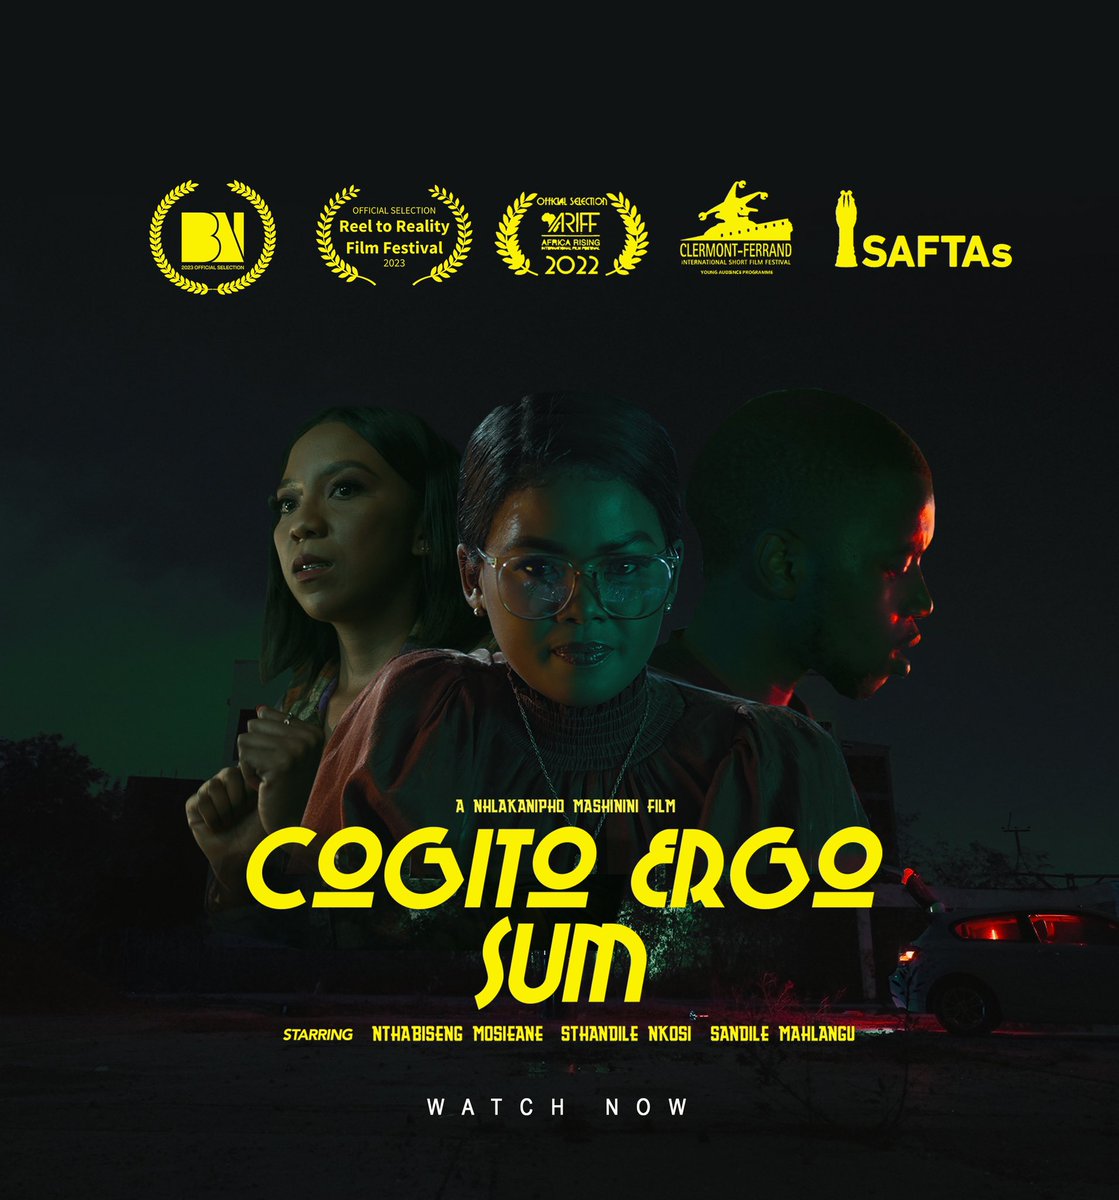 Make sure to watch our short film if you haven’t! Start the week off right! 🤞🏻🎟️🎥 #Cogitoergosum Link below! sslfilms.com